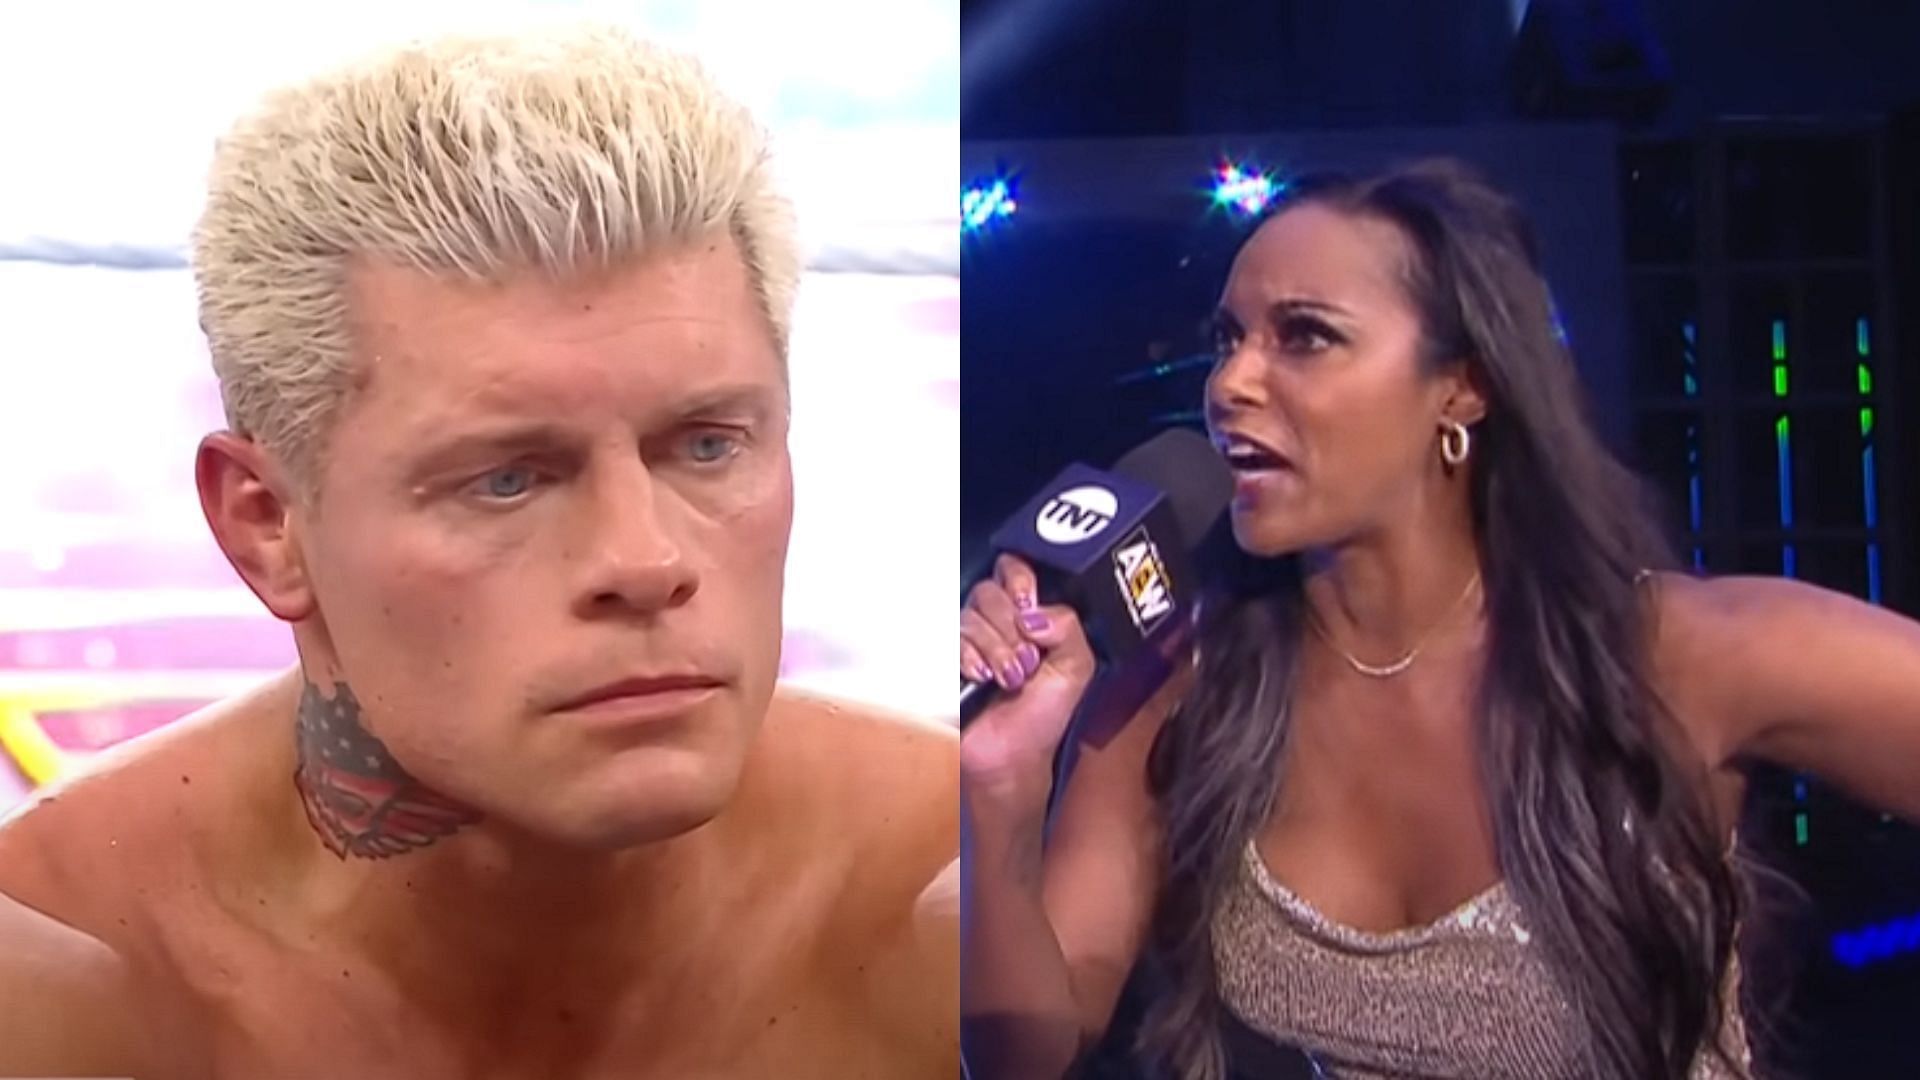 Cody Rhodes and Brandi Rhodes are married in real-life [Photos courtesy of WWE and AEW Official YouTube Channels]